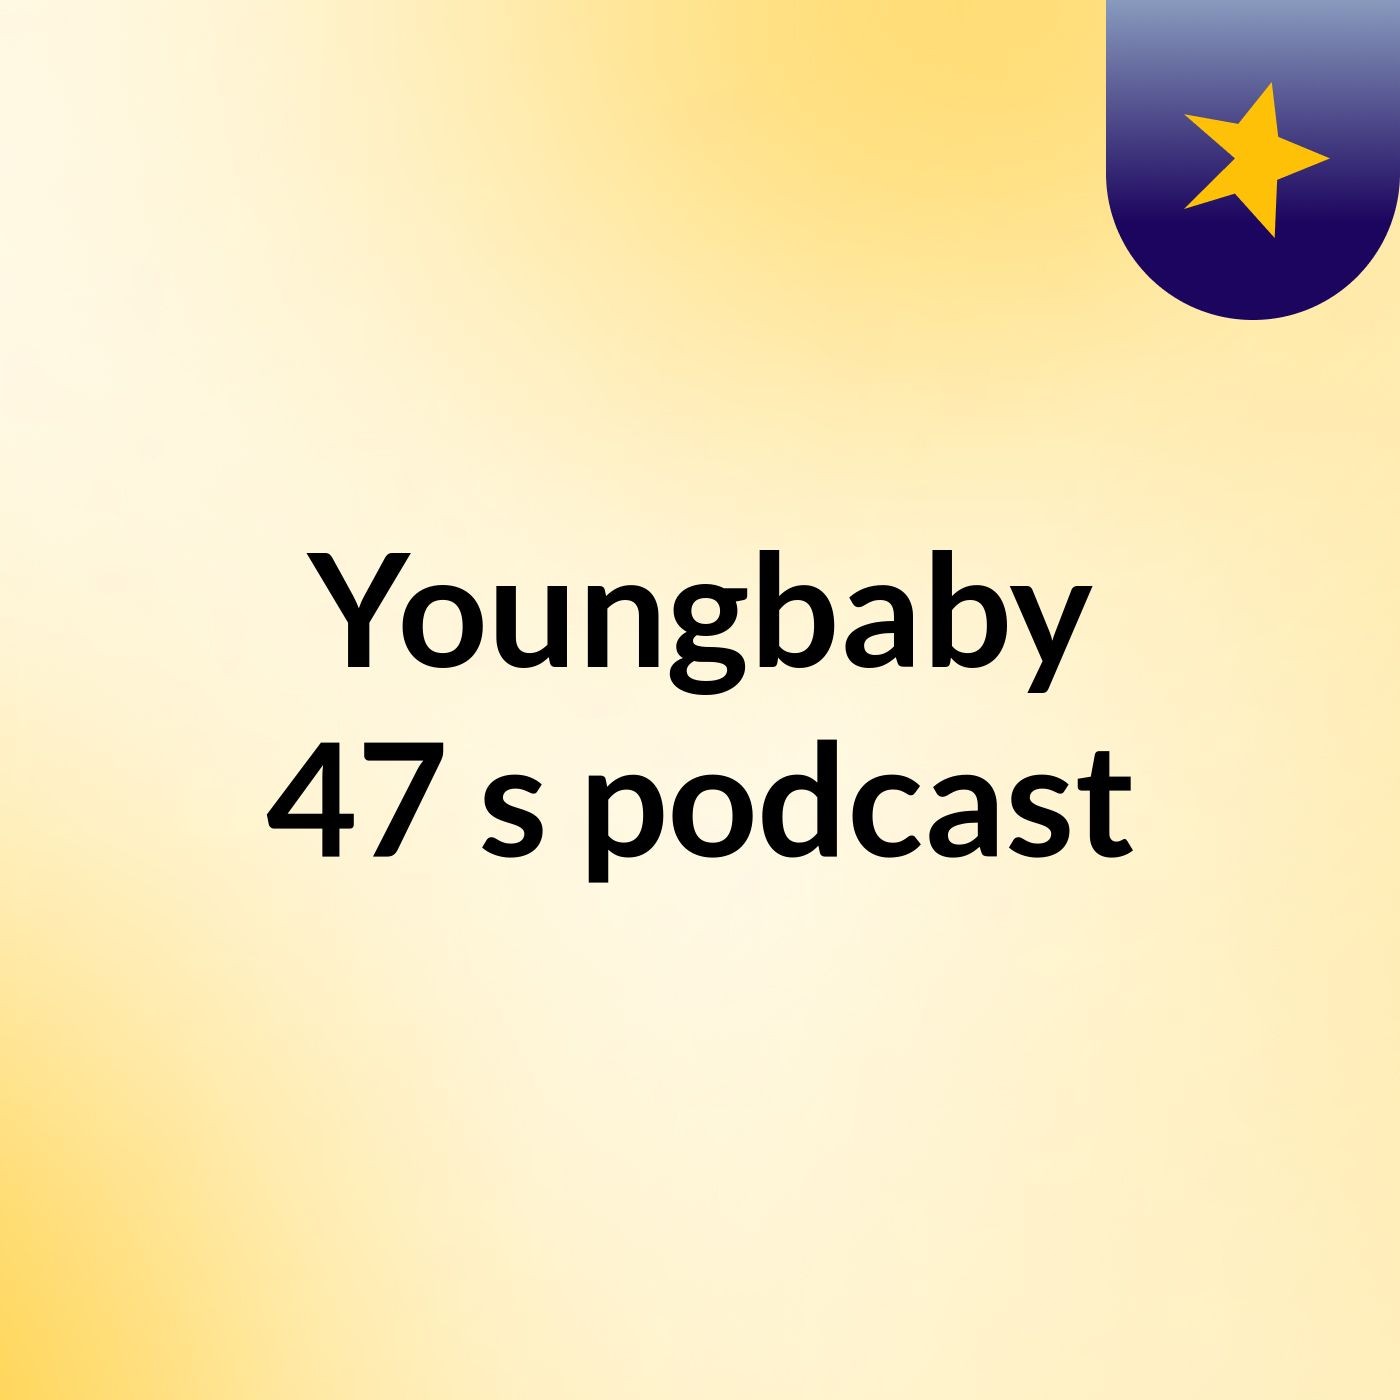 Youngbaby 47's podcast